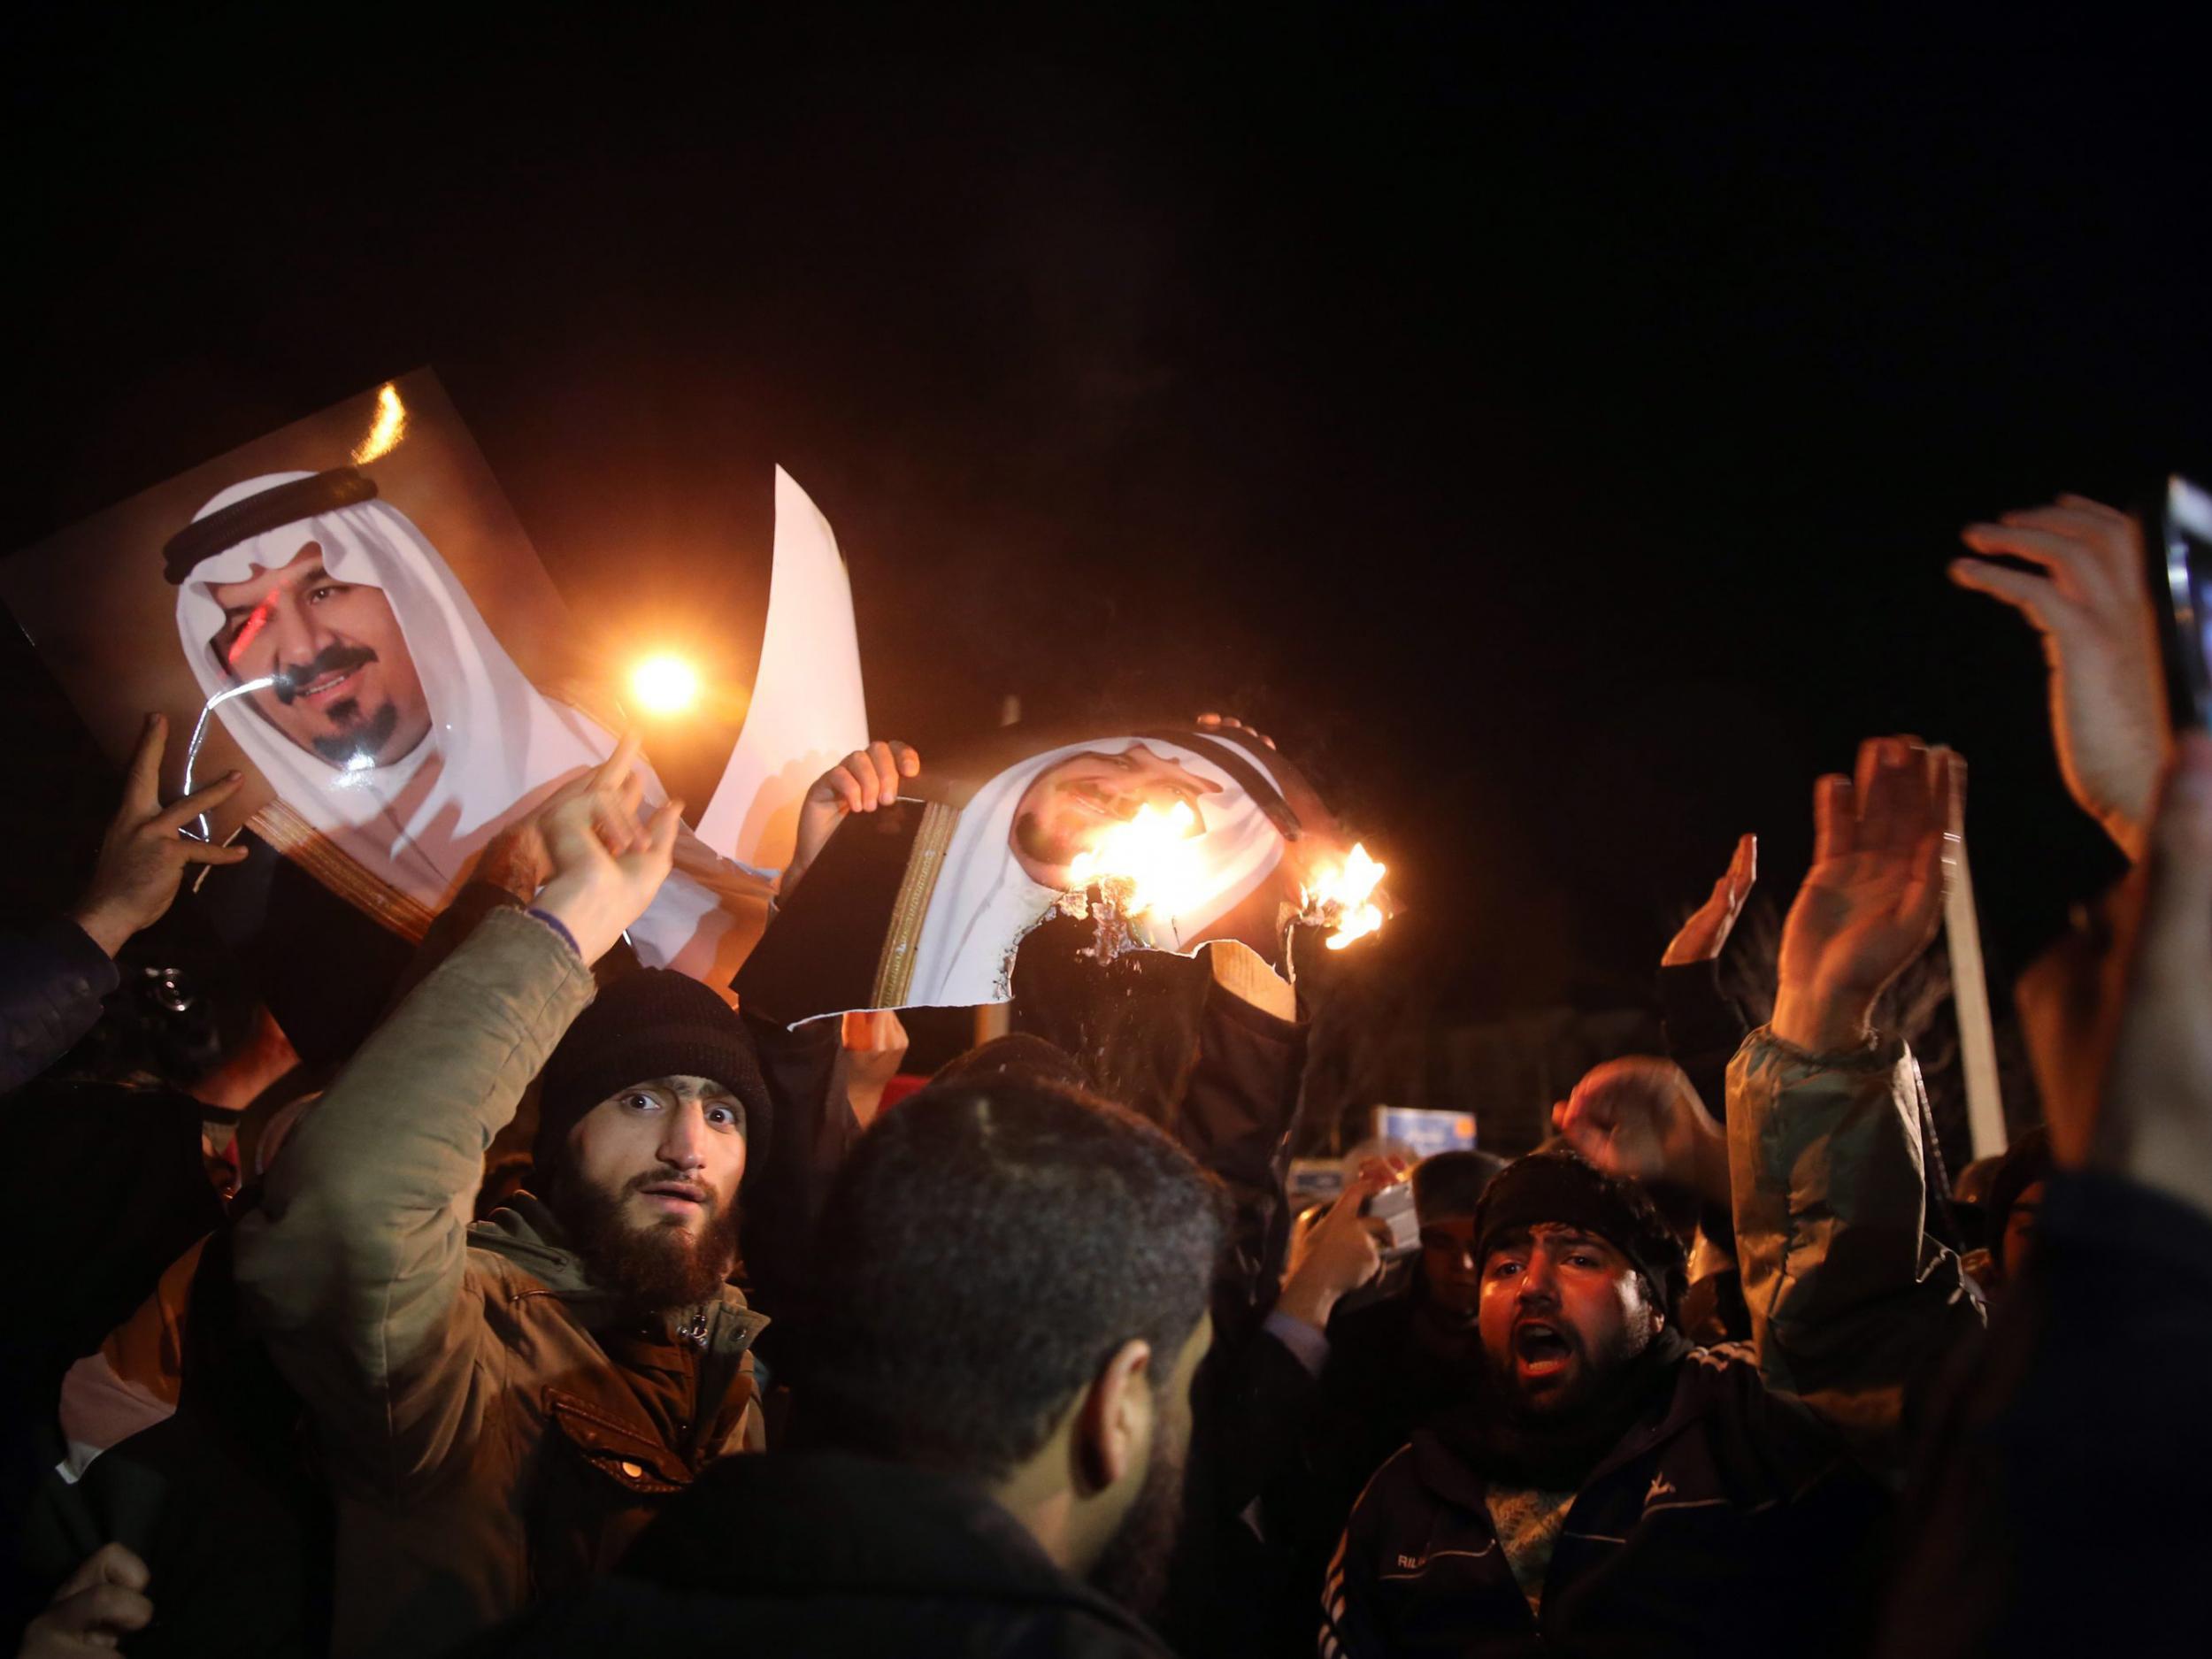 The execution of prominent Shia cleric Sheikh Nimr al-Nimr sparked protests across the Middle East. His young nephew remains on death row and, despite UK assurances, could still be killed at any time